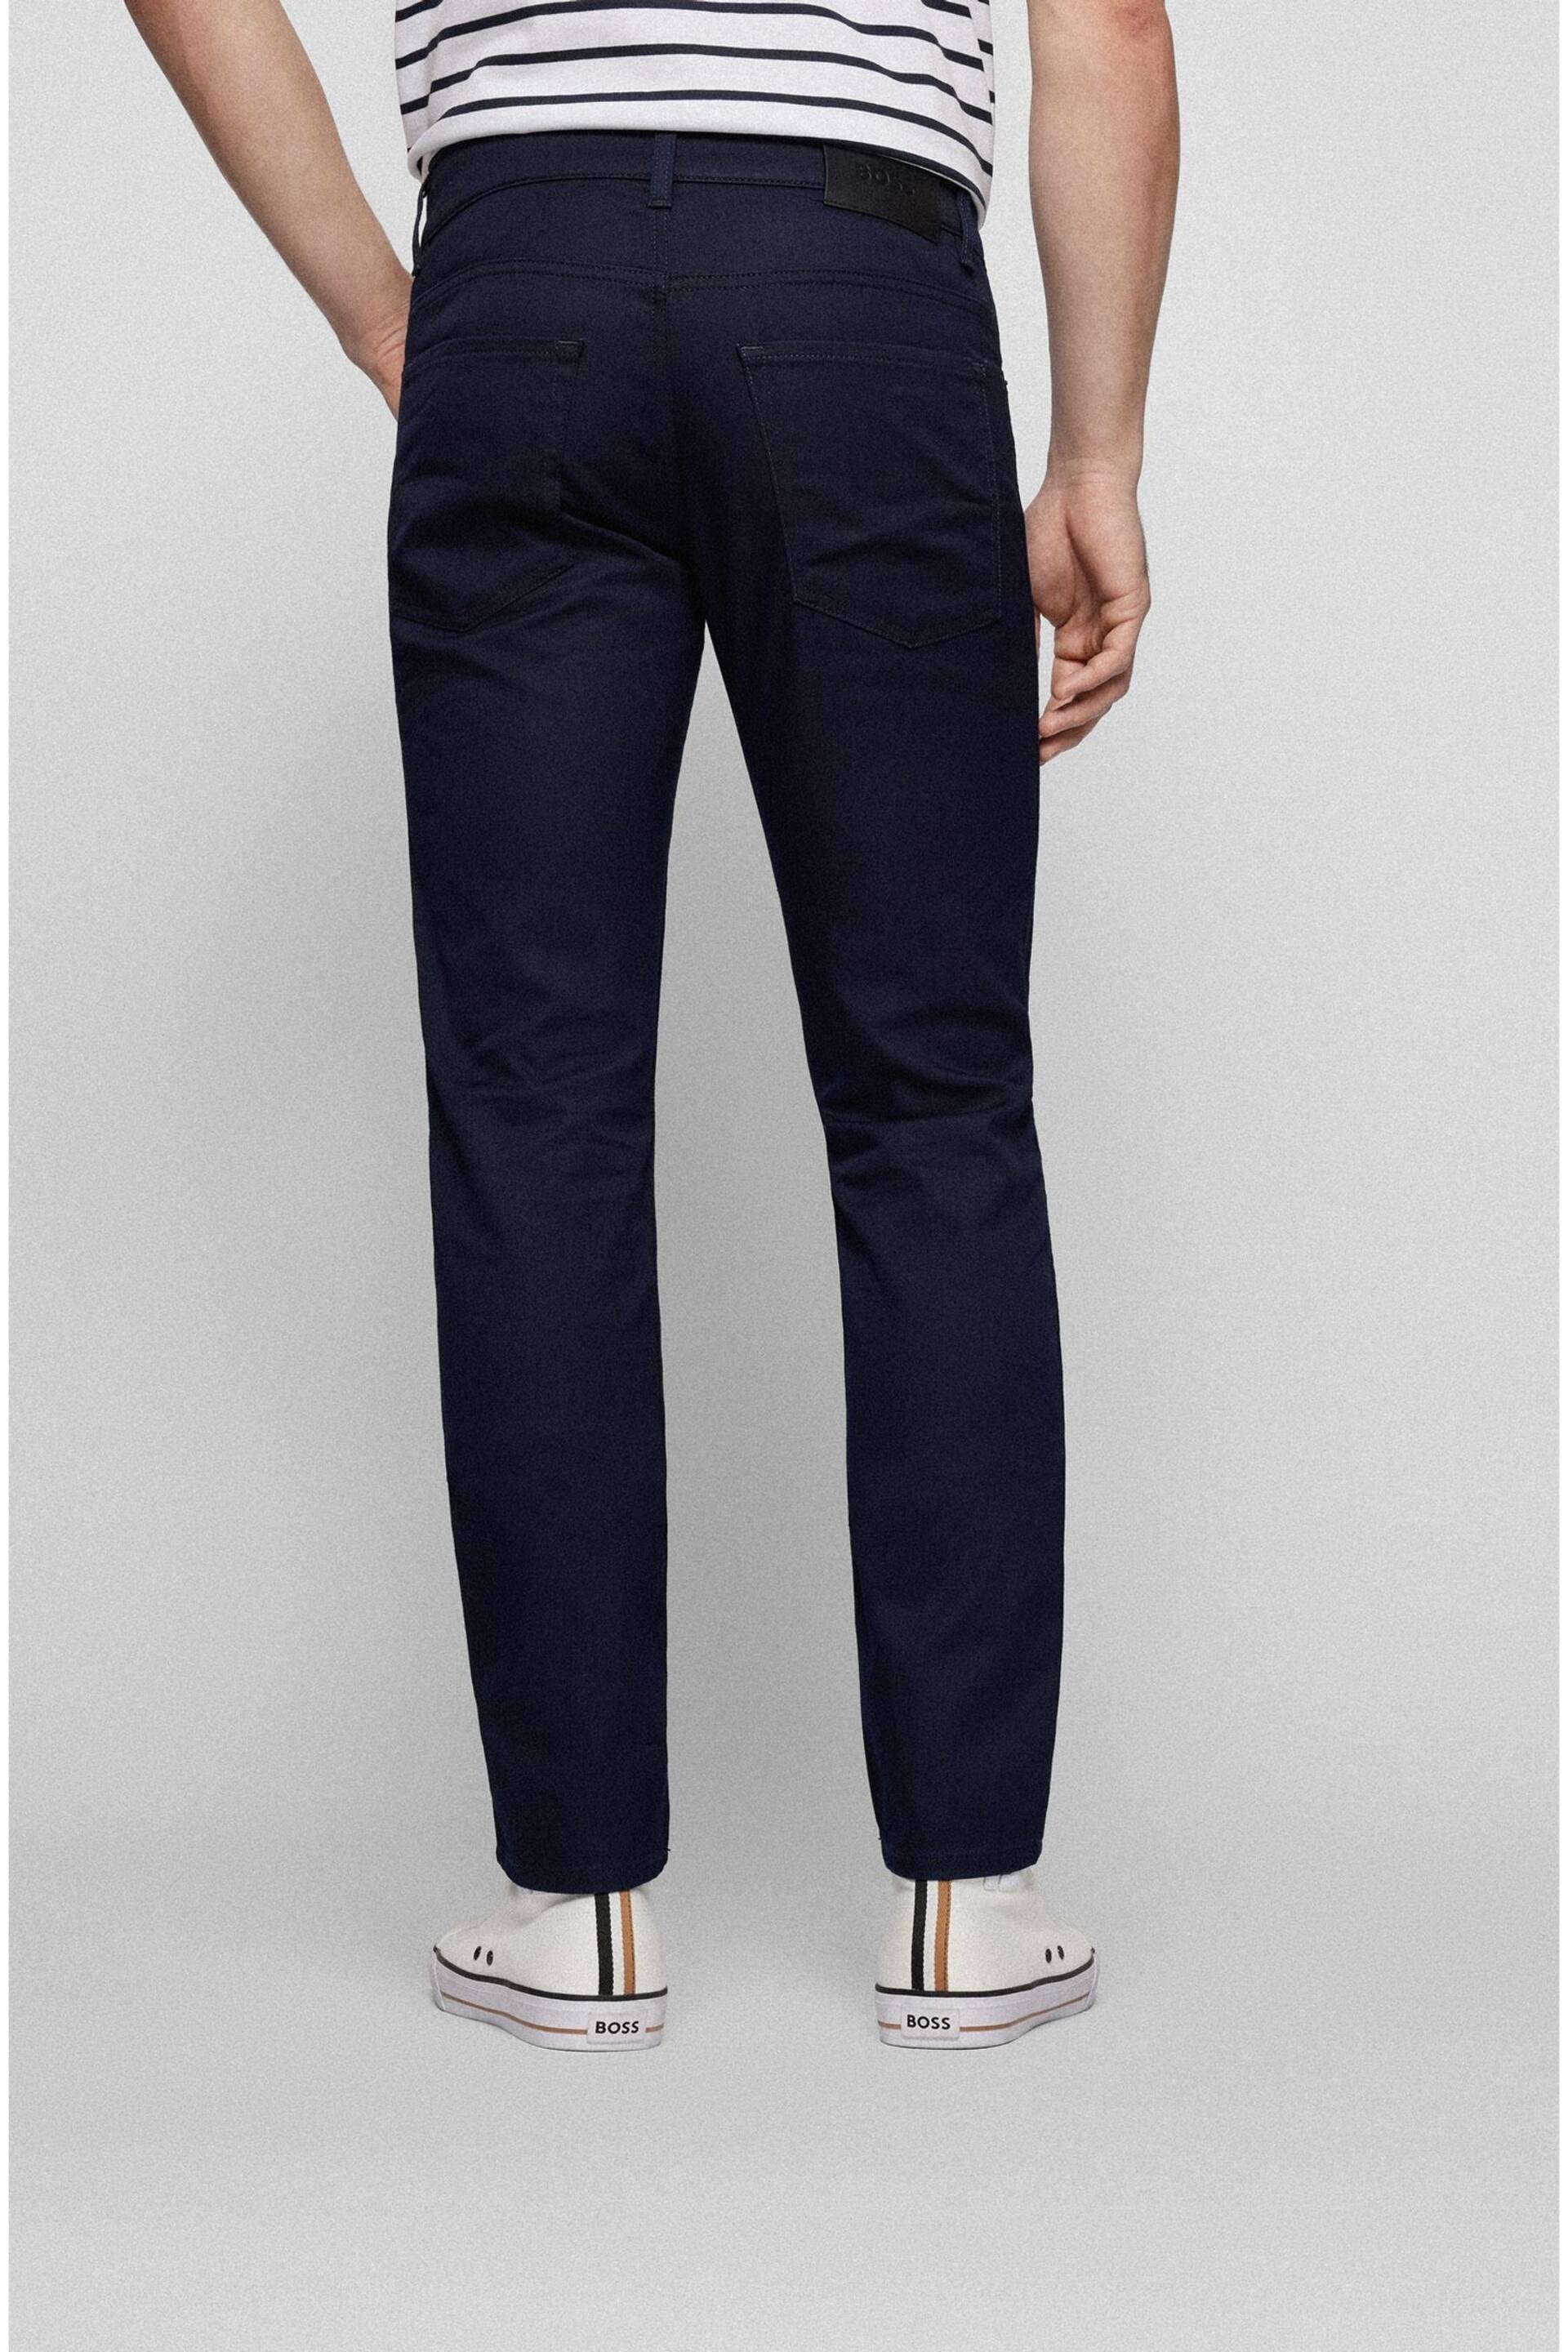 BOSS Blue Delaware Slim Fit Stretch Jeans - Image 2 of 5